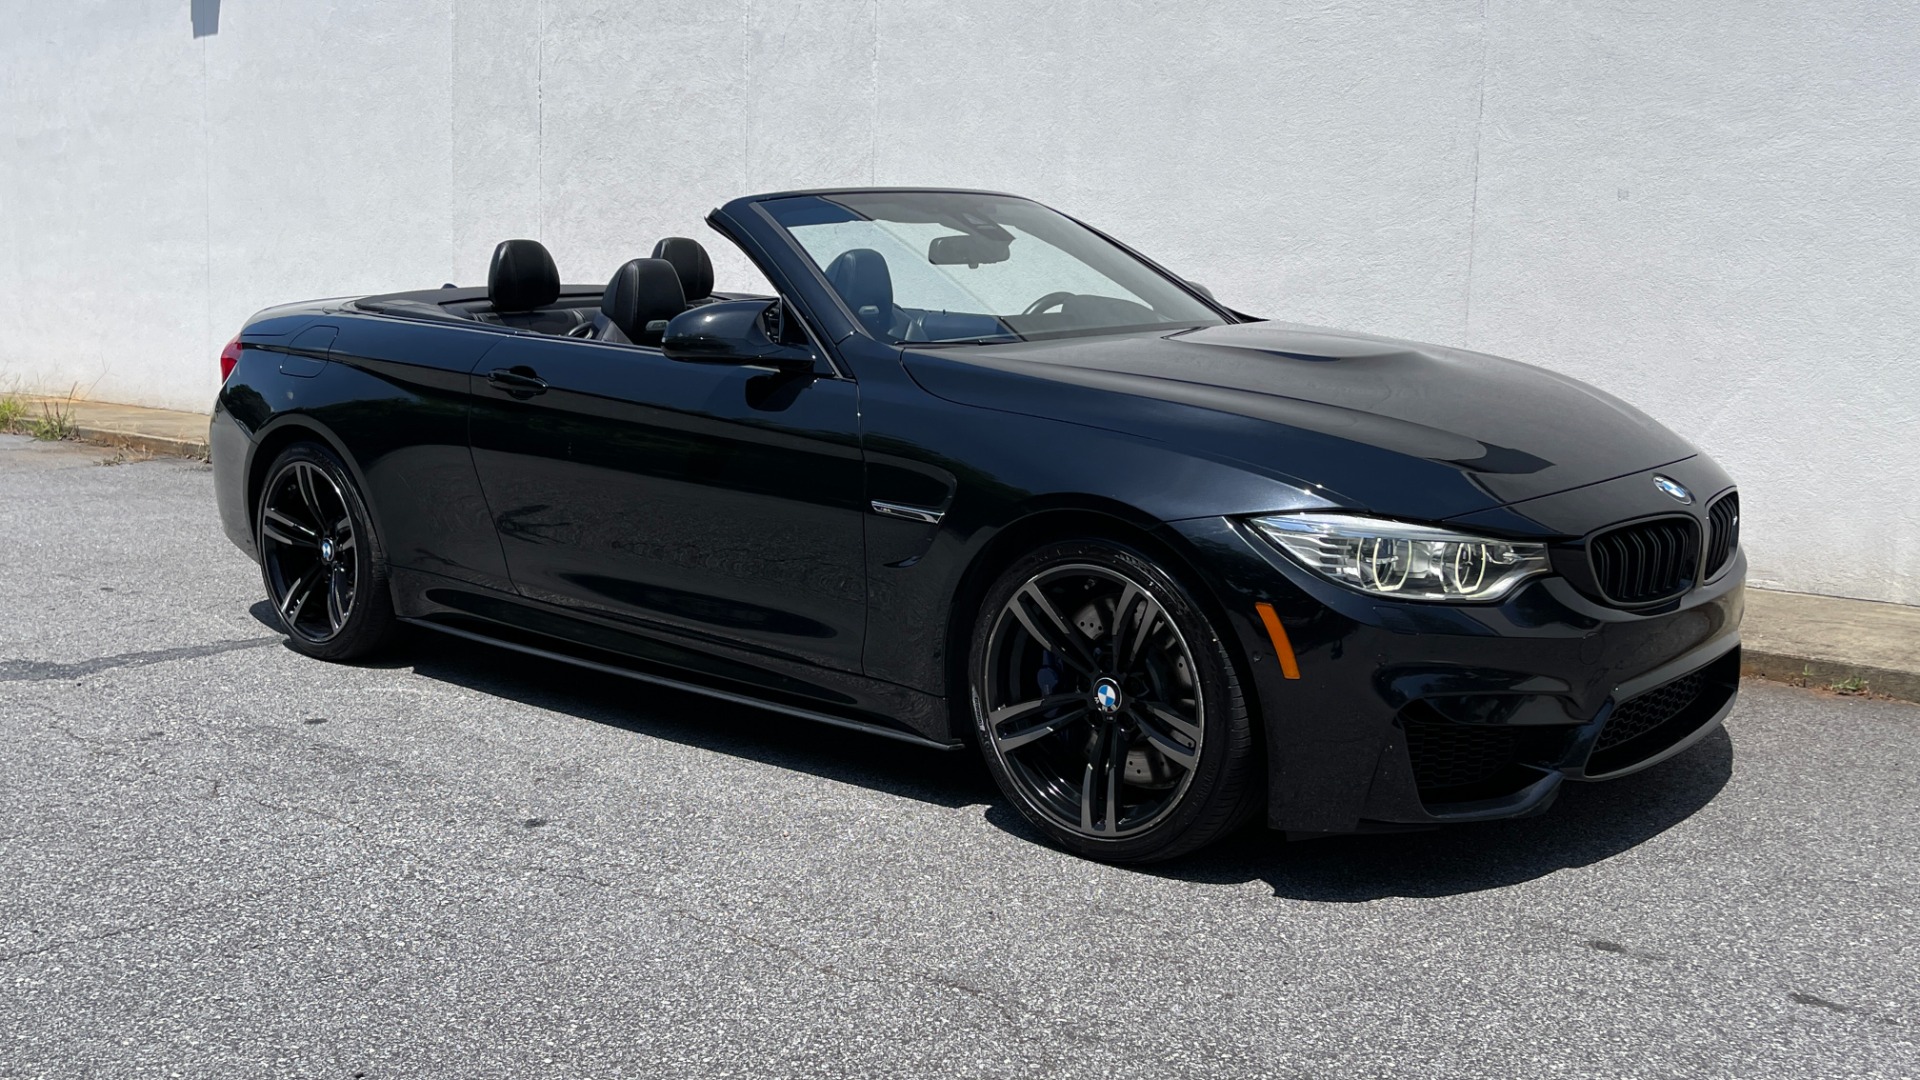 Used 2016 BMW M4 CONVERTIBLE / EXECUTIVE / DUAL CLUTCH / ADAPTIVE M SUSPENSION for sale $44,000 at Formula Imports in Charlotte NC 28227 4